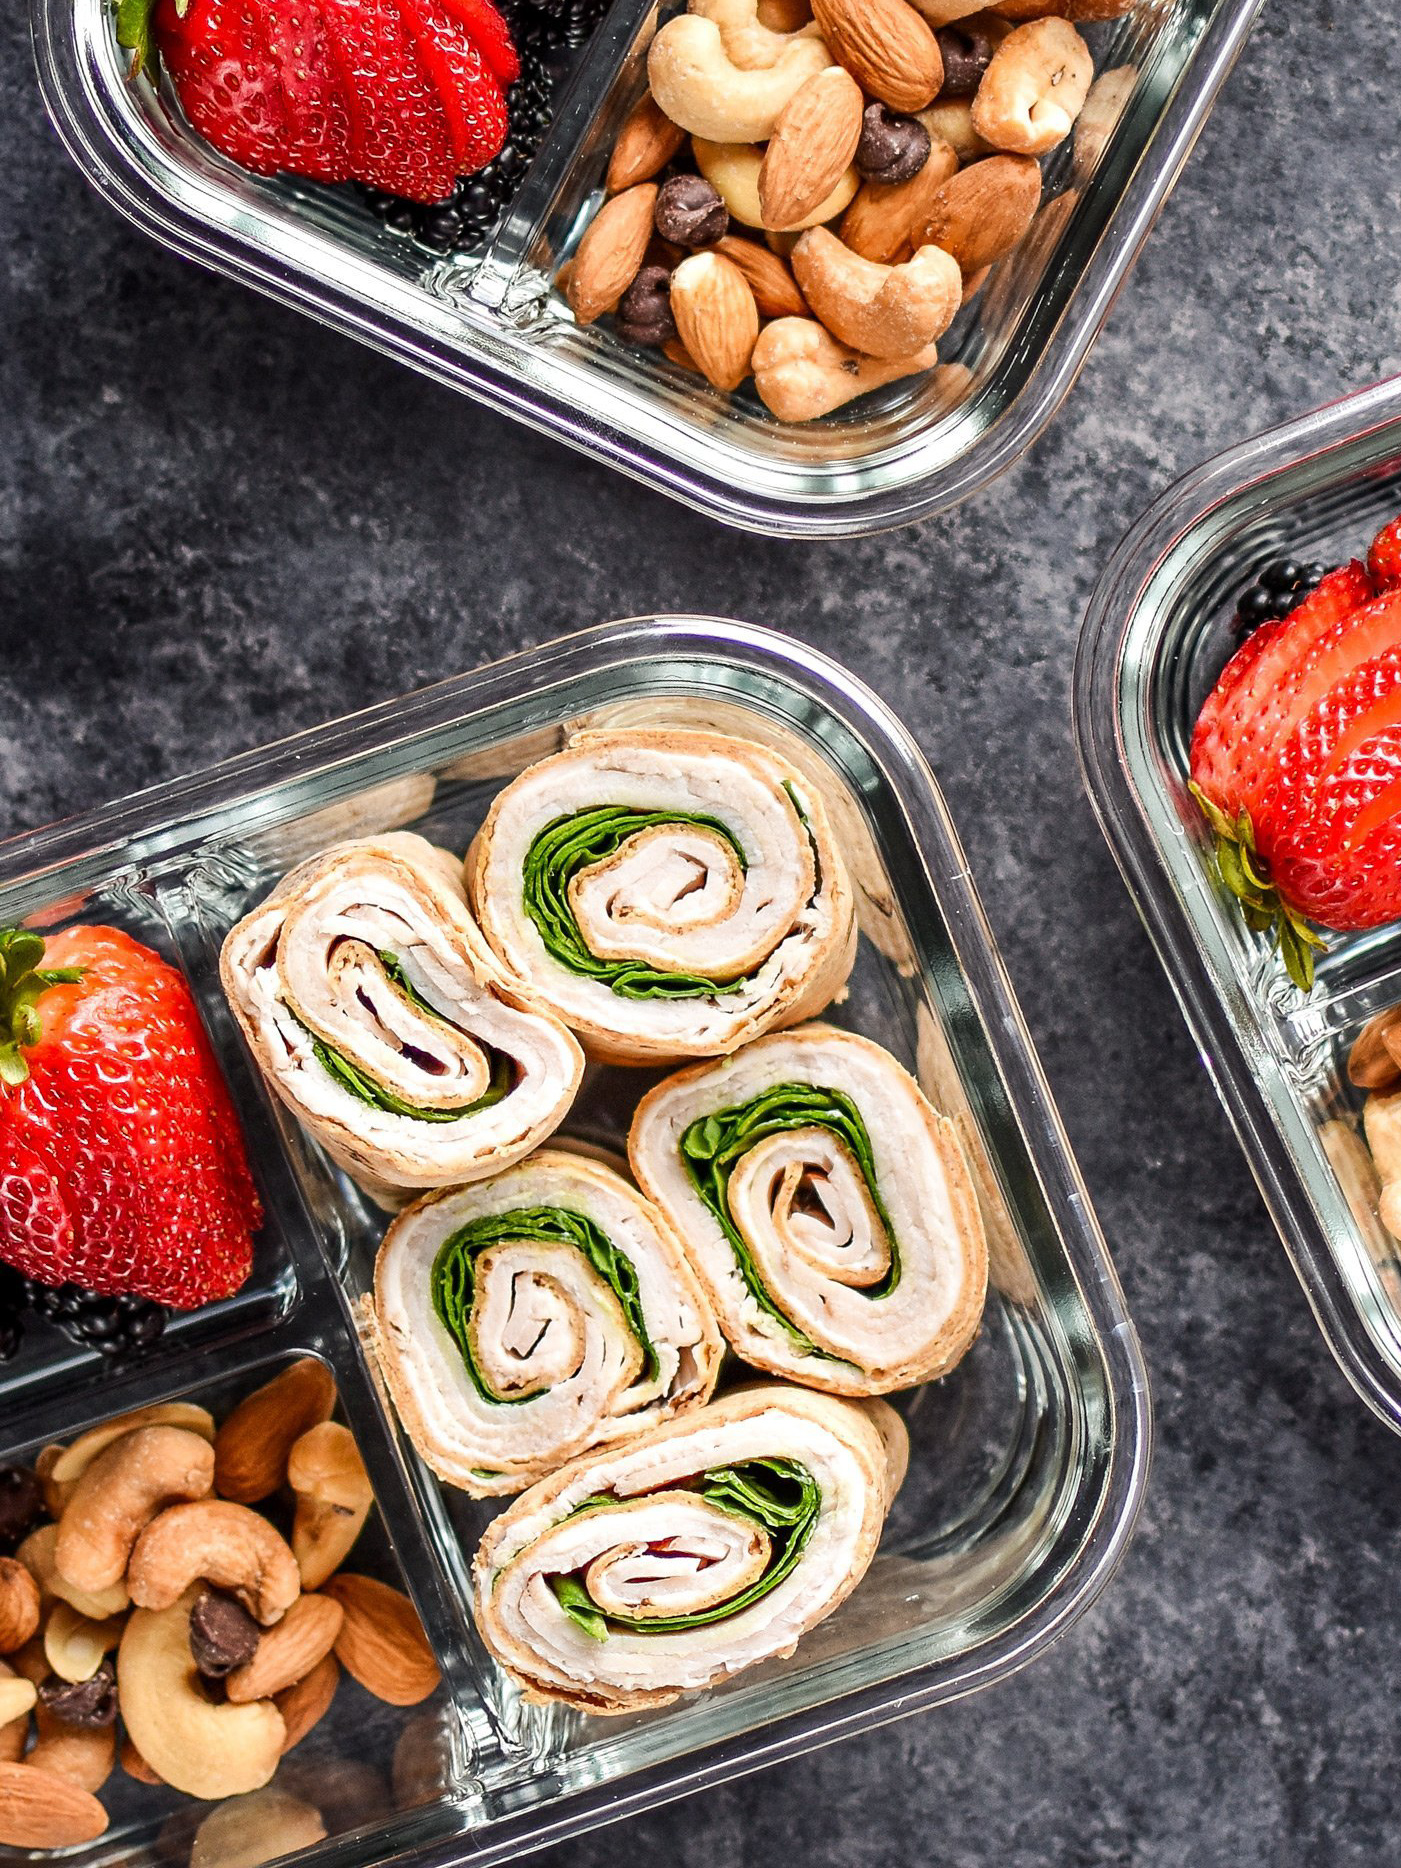 Turkey pinwheels prepped for lunches, a meal prep lunch recipe